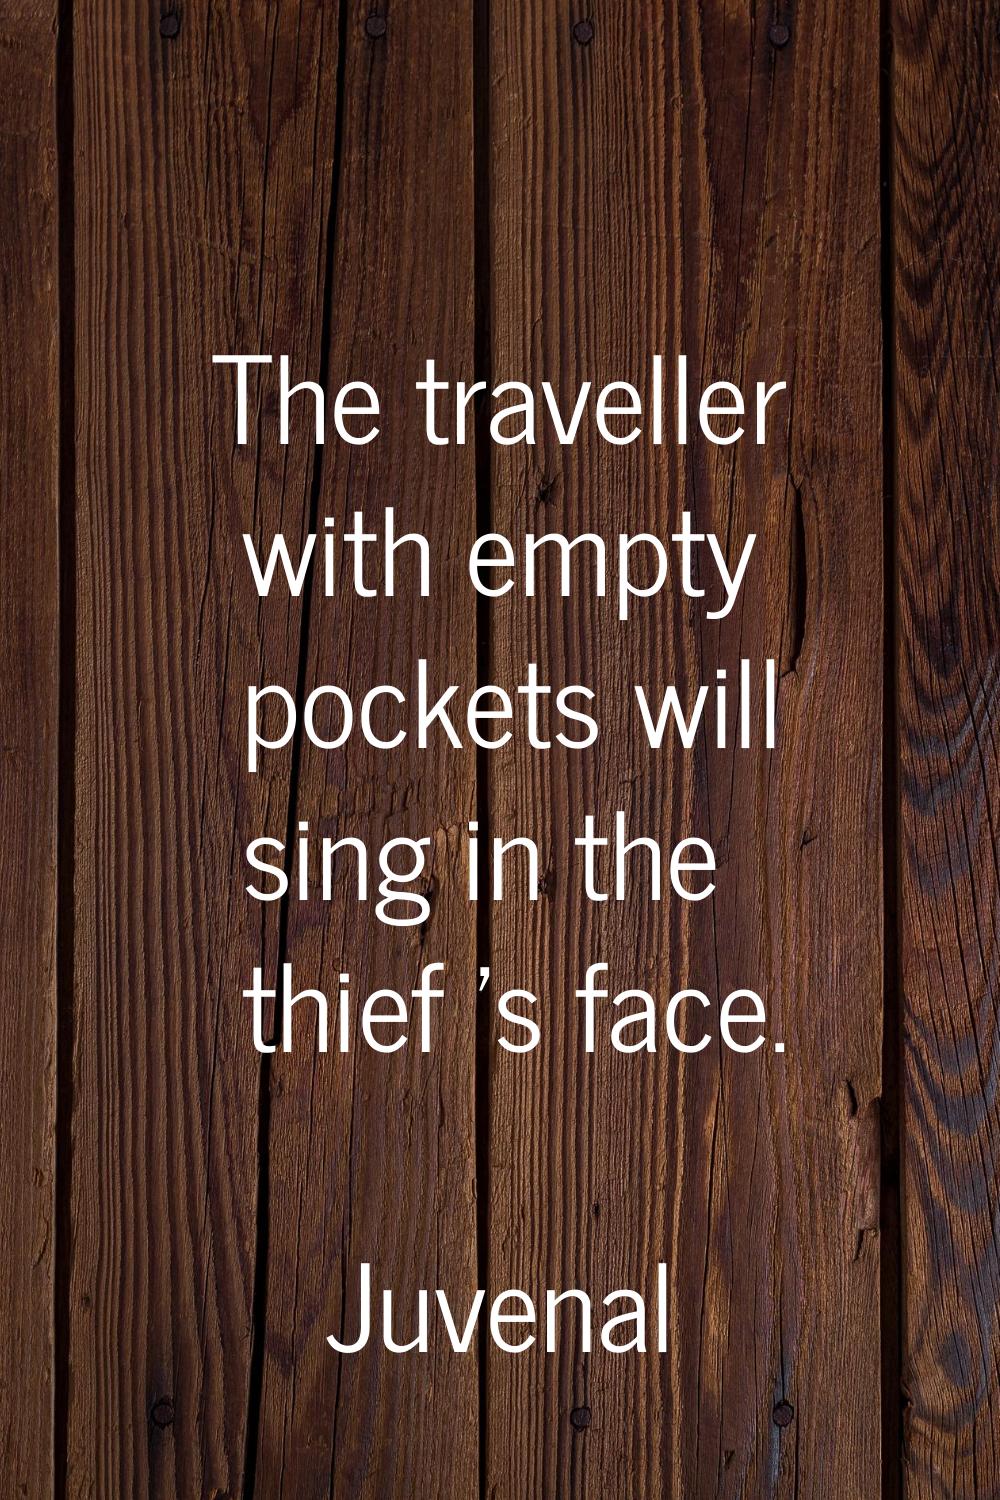 The traveller with empty pockets will sing in the thief 's face.